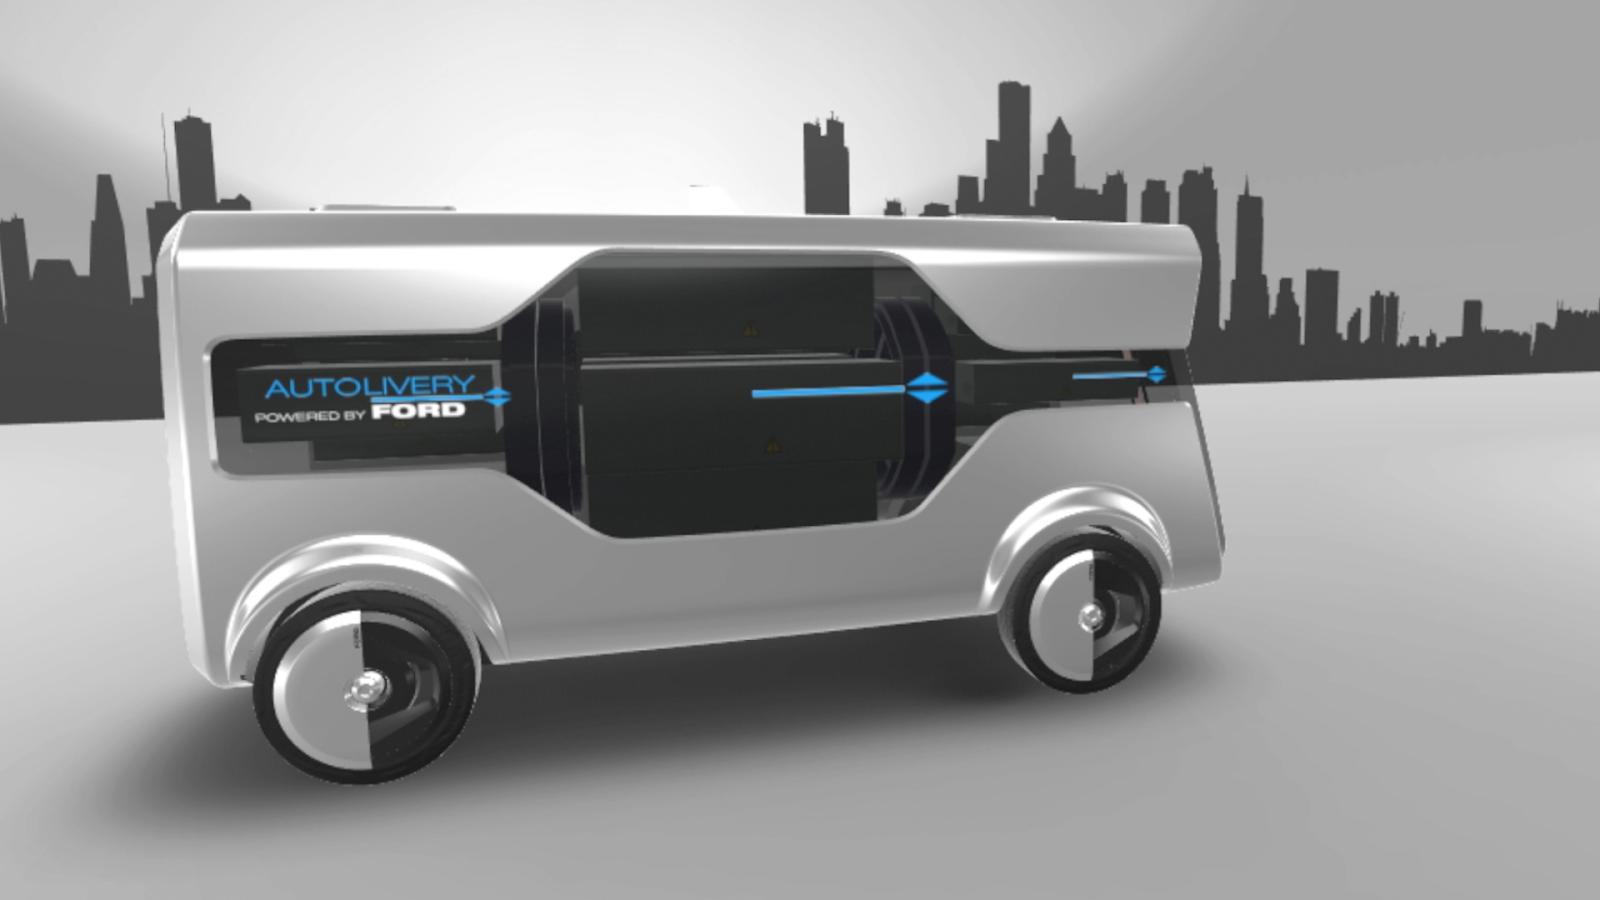 FORD 2017 MWC Autolivery 08 Ford : The city of the future will have autonomous vans and drones... for delivery